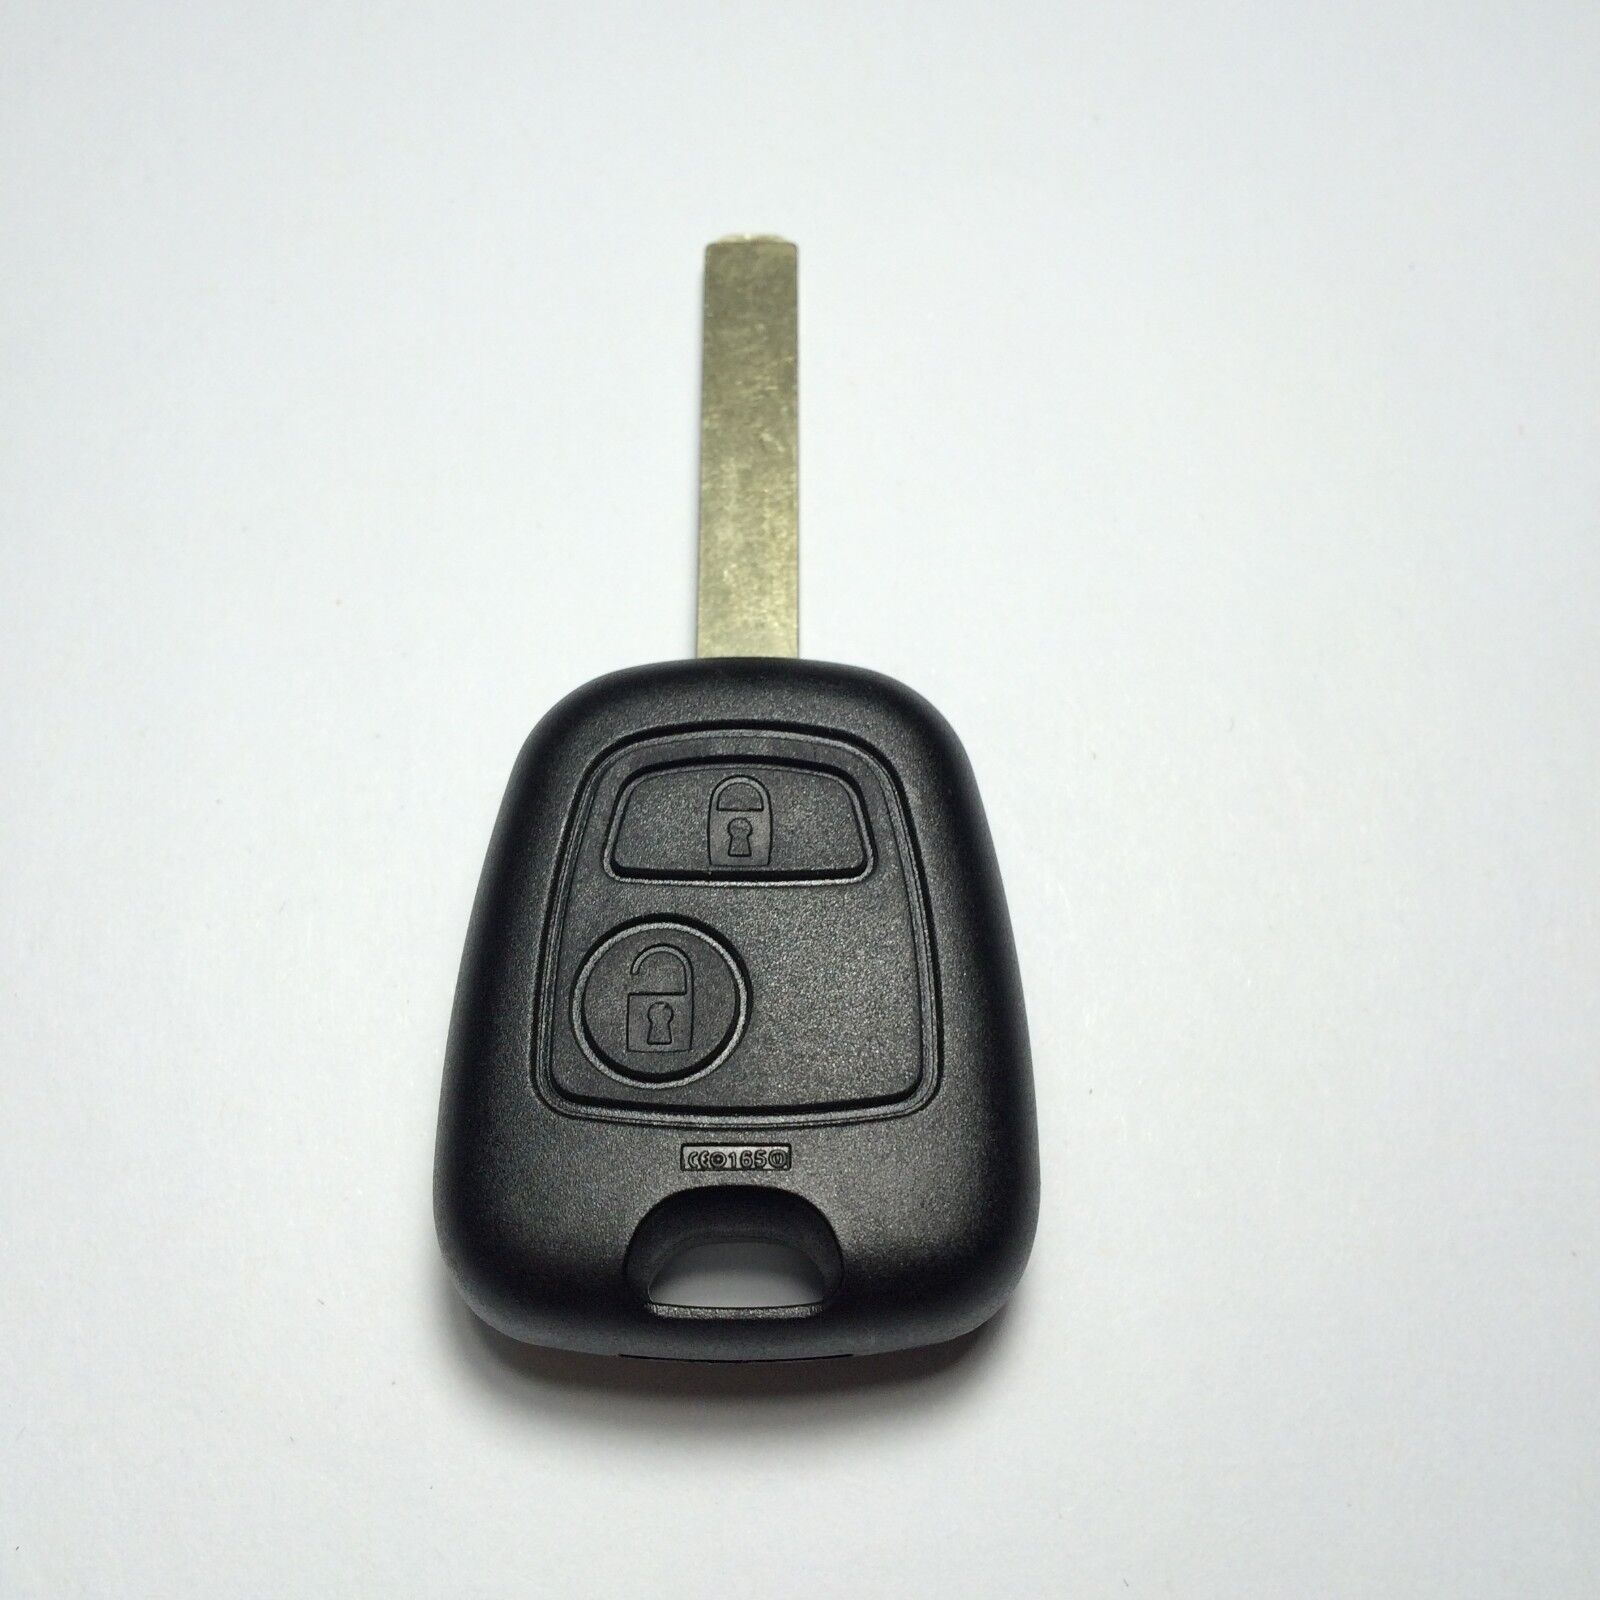 New Arrival 2 Button Remote Key Case For Peugeot 307 VA2 Blade Without Groove